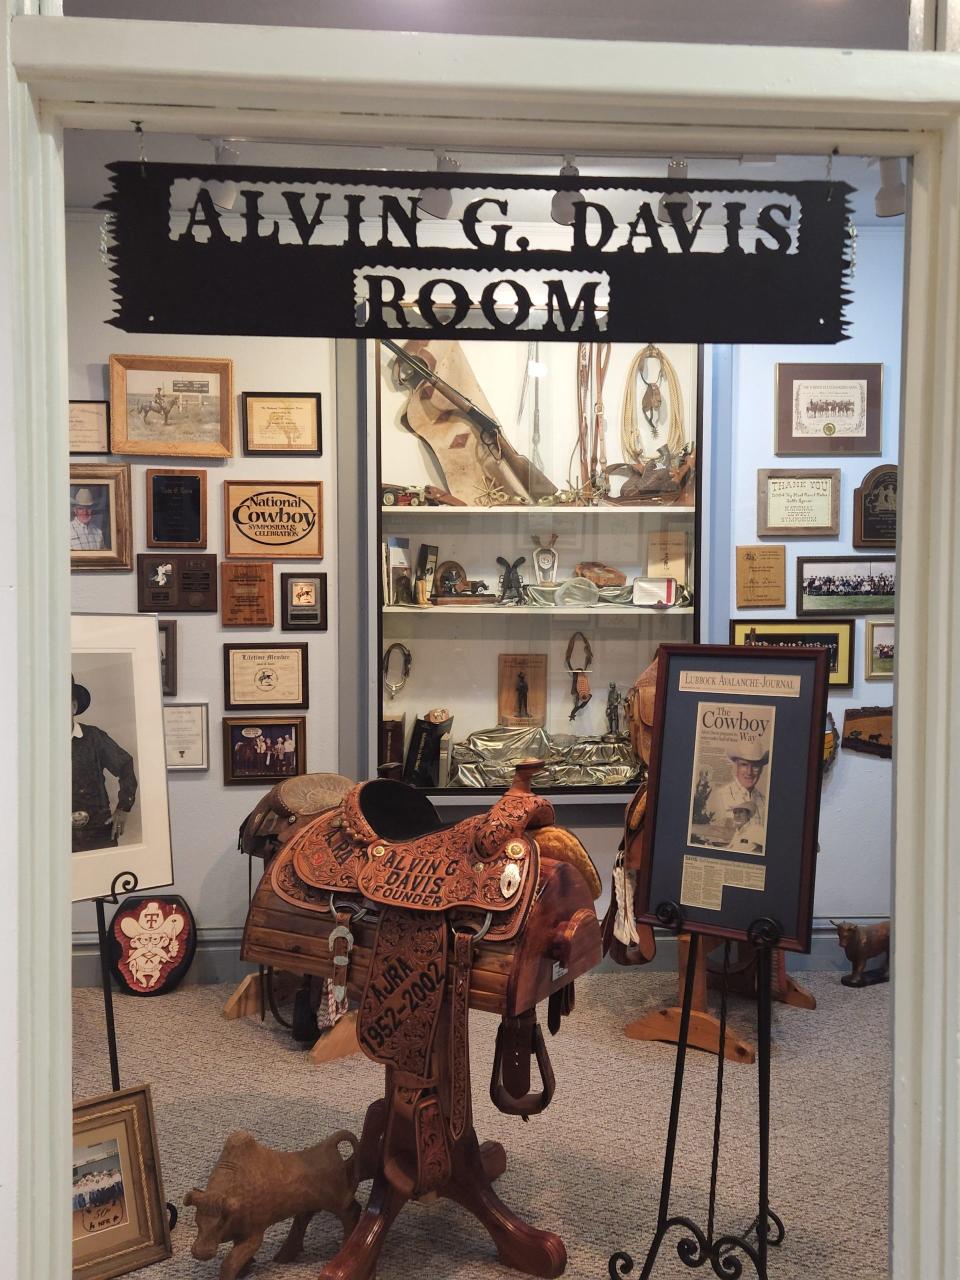 A collection of memorabilia, relics and other items in the Alvin G. Davis room in the Garza County Historical Museum in Post.